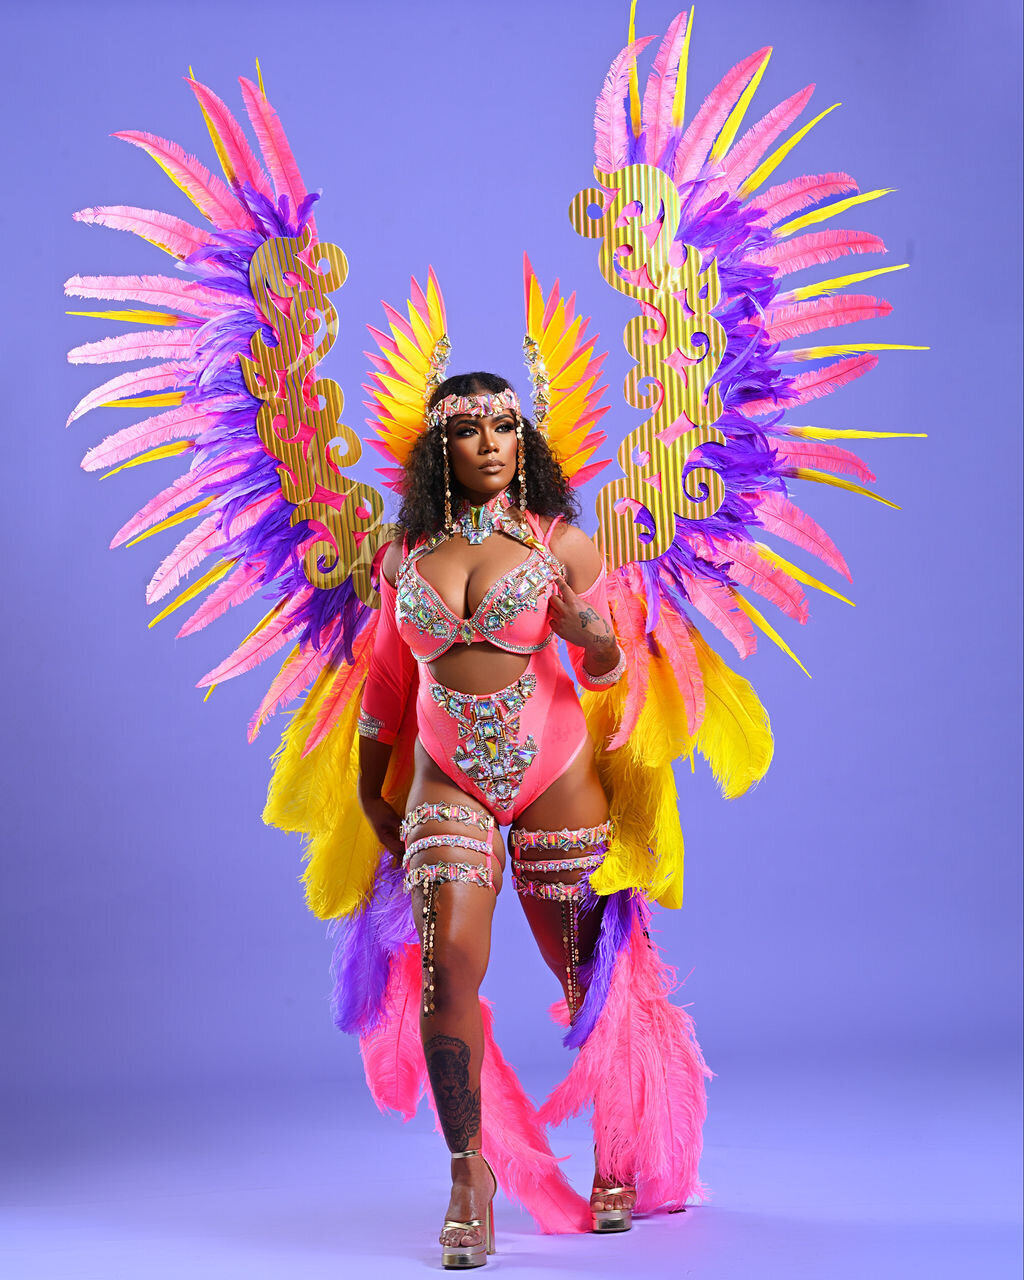 Register to play mas at the 2023 Toronto Caribbean Carnival with Sunlime Mas